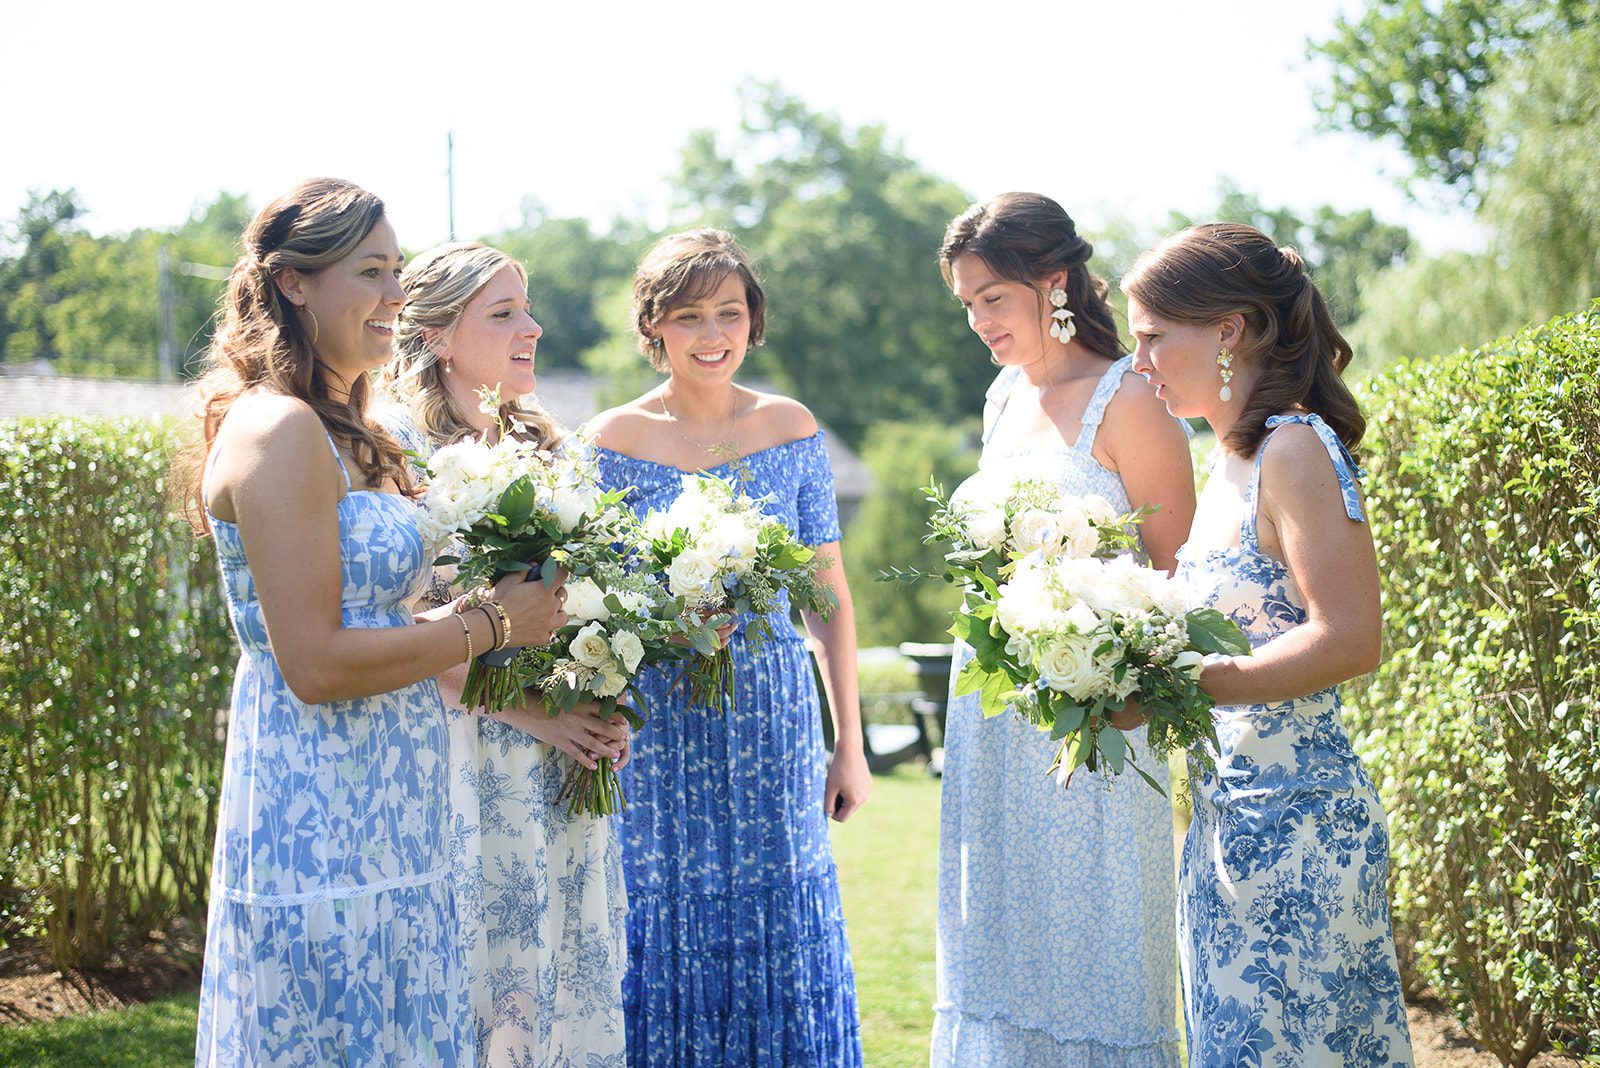 Bridesmaids-Kate Uhry photography